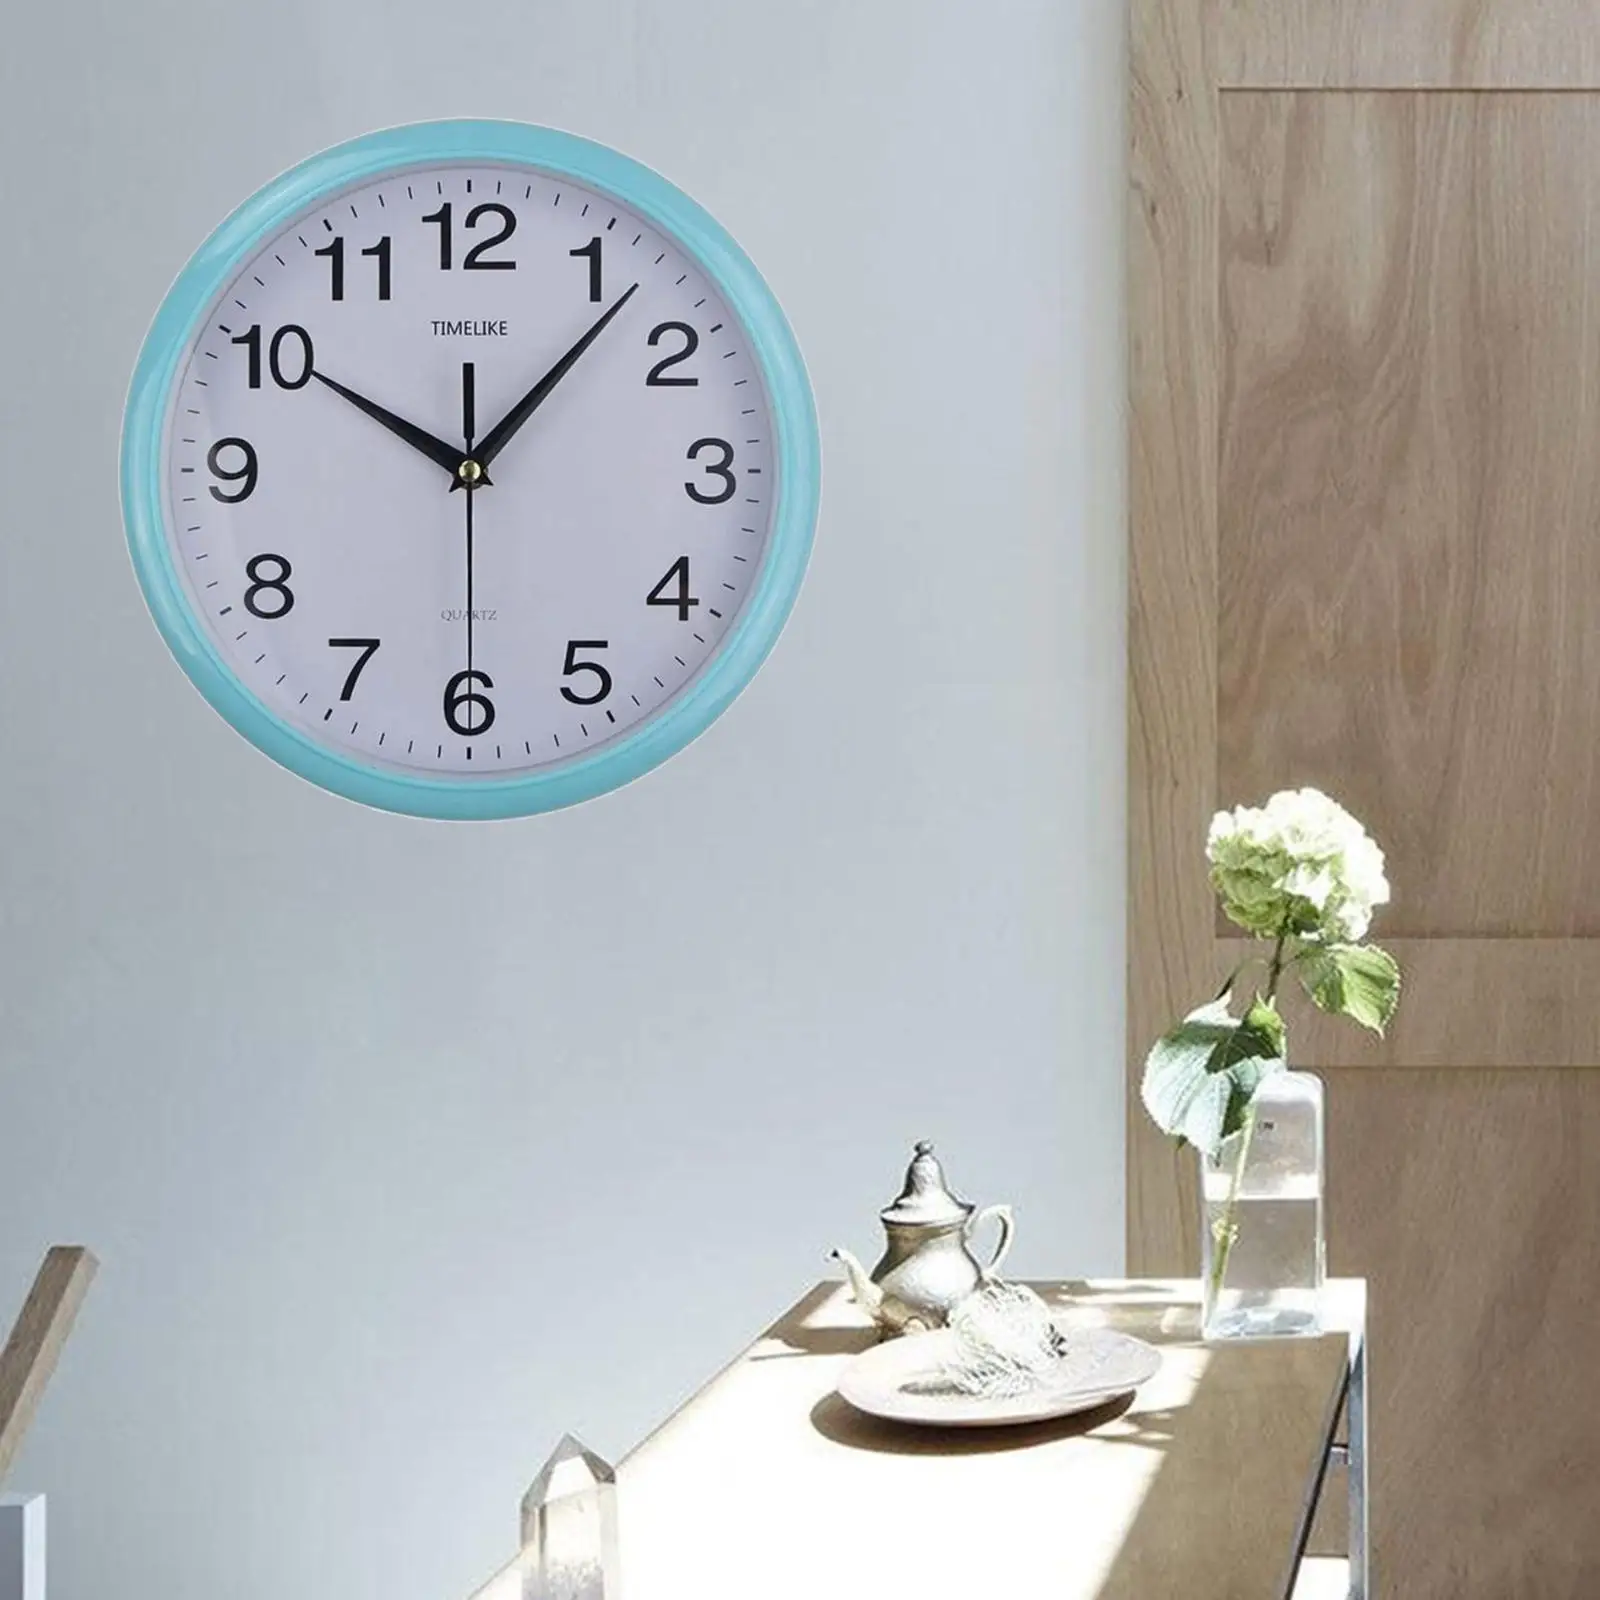 10Inch Modern Wall Clock Silent Non Ticking Decorative Wall Clocks Decorations for Living Room Bathroom Decor Kitchen